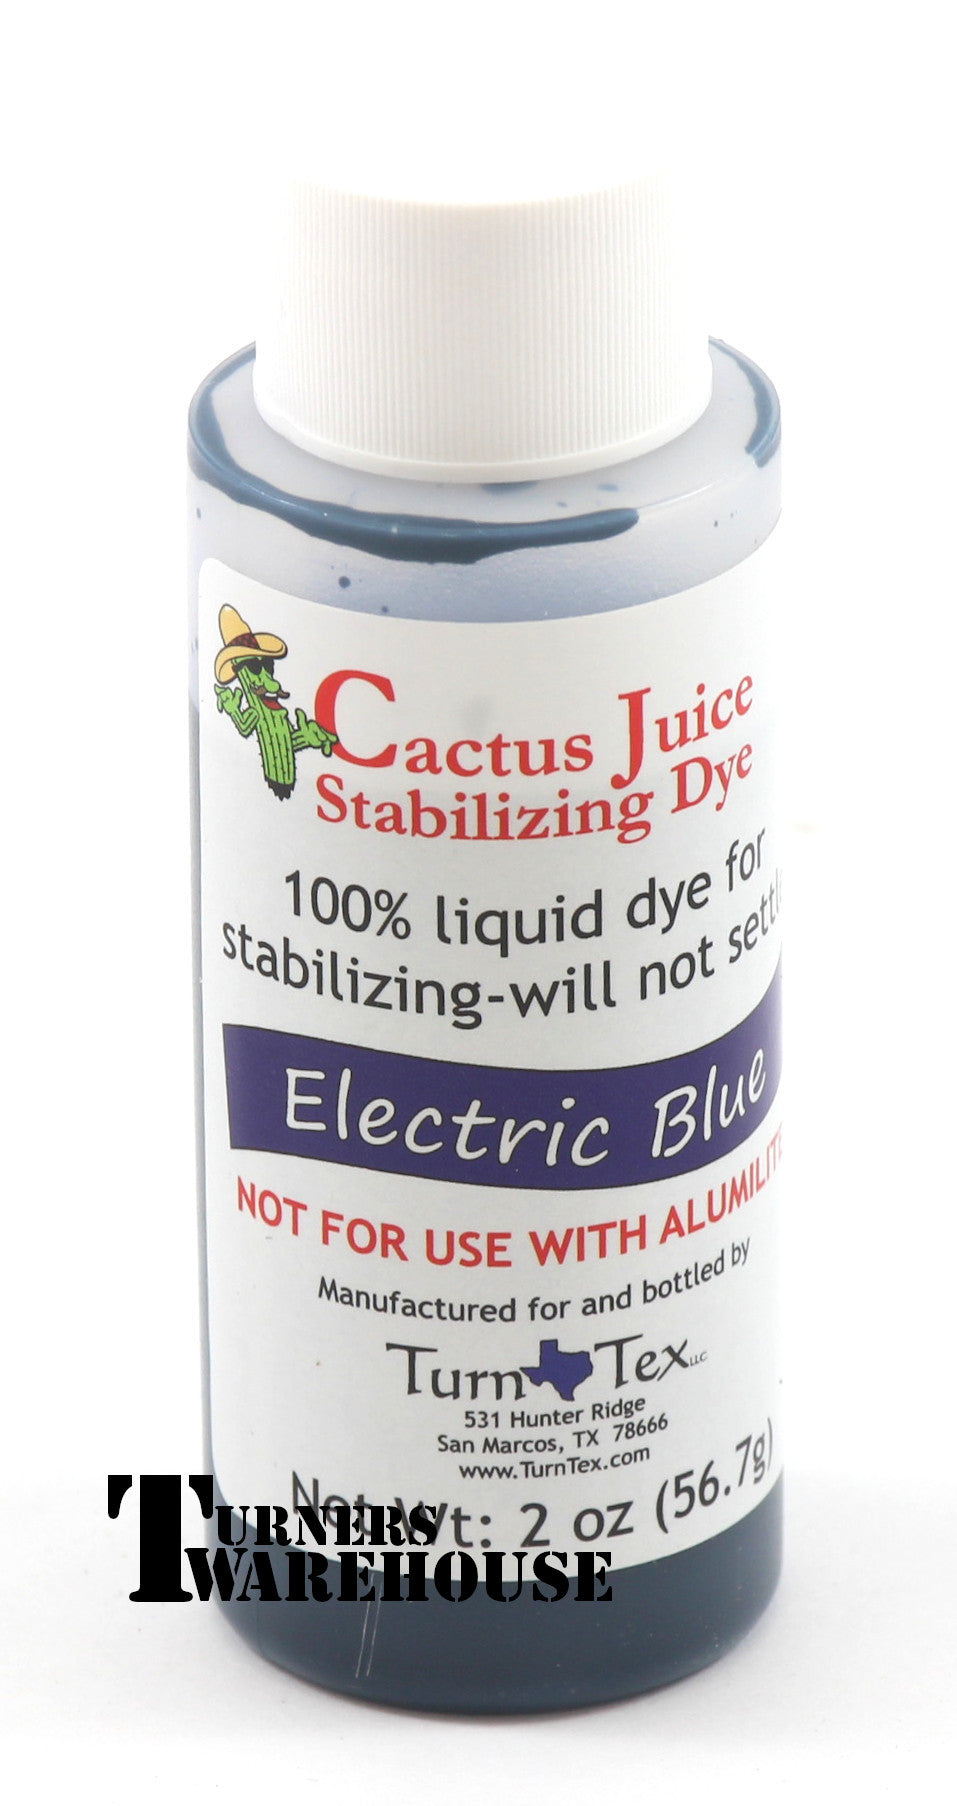 Cactus Juice Stabilizing Resin and Dyes: 1/2 Gallon (1.89 L) Cactus Juice